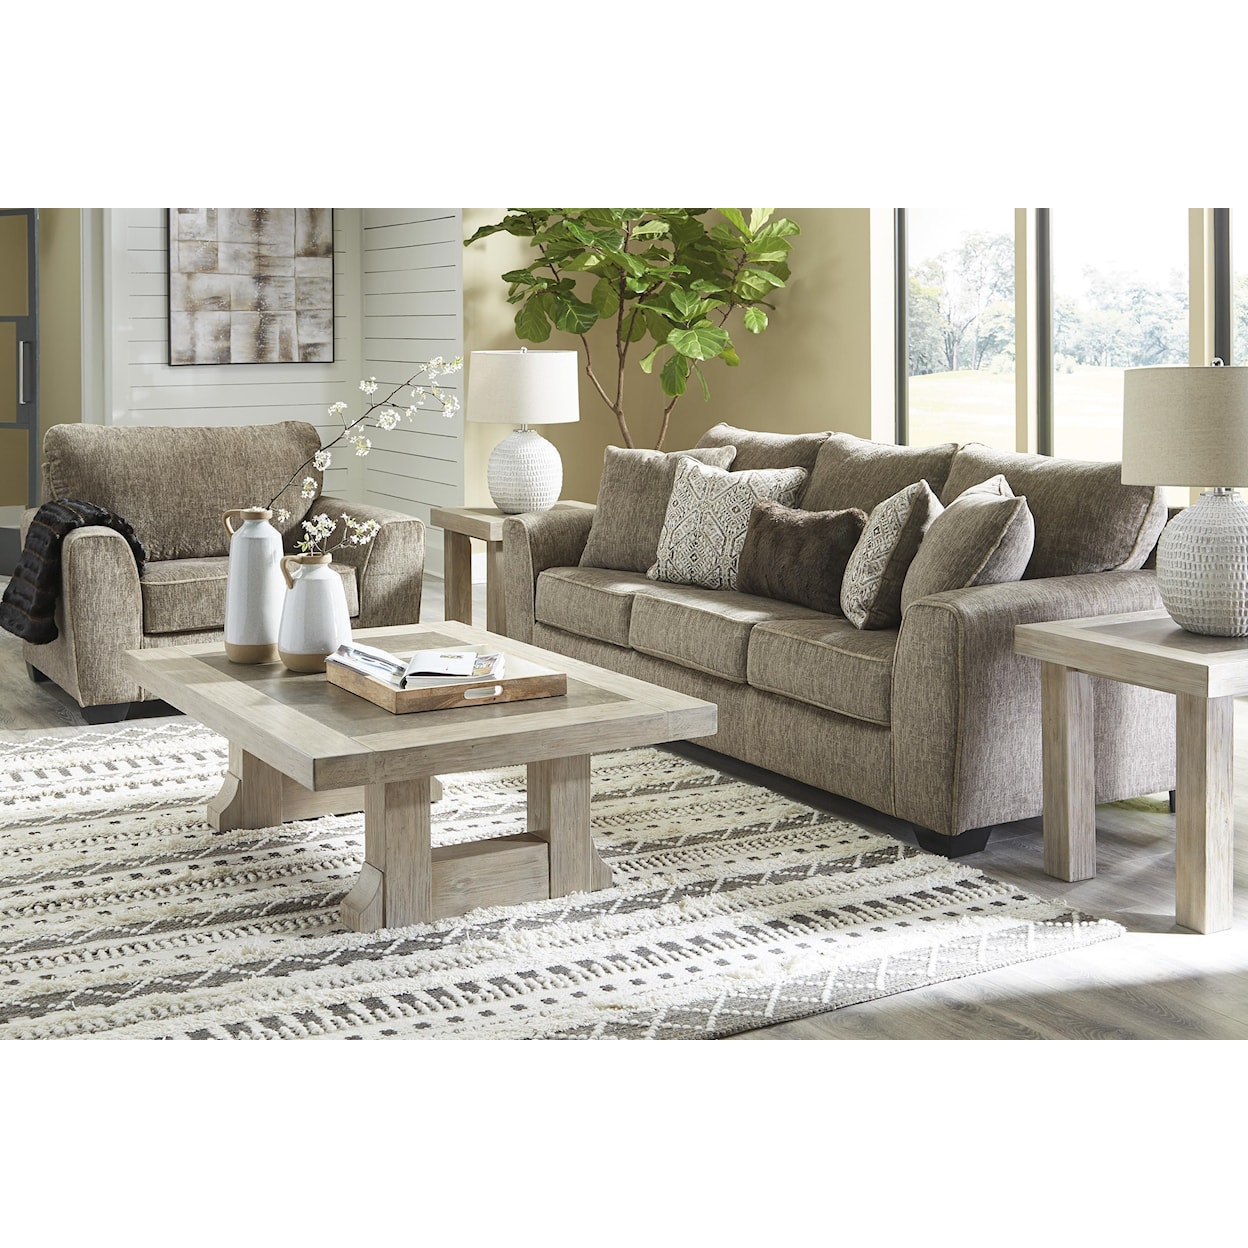 Benchcraft Olin Sofa and Chair Living Room Group